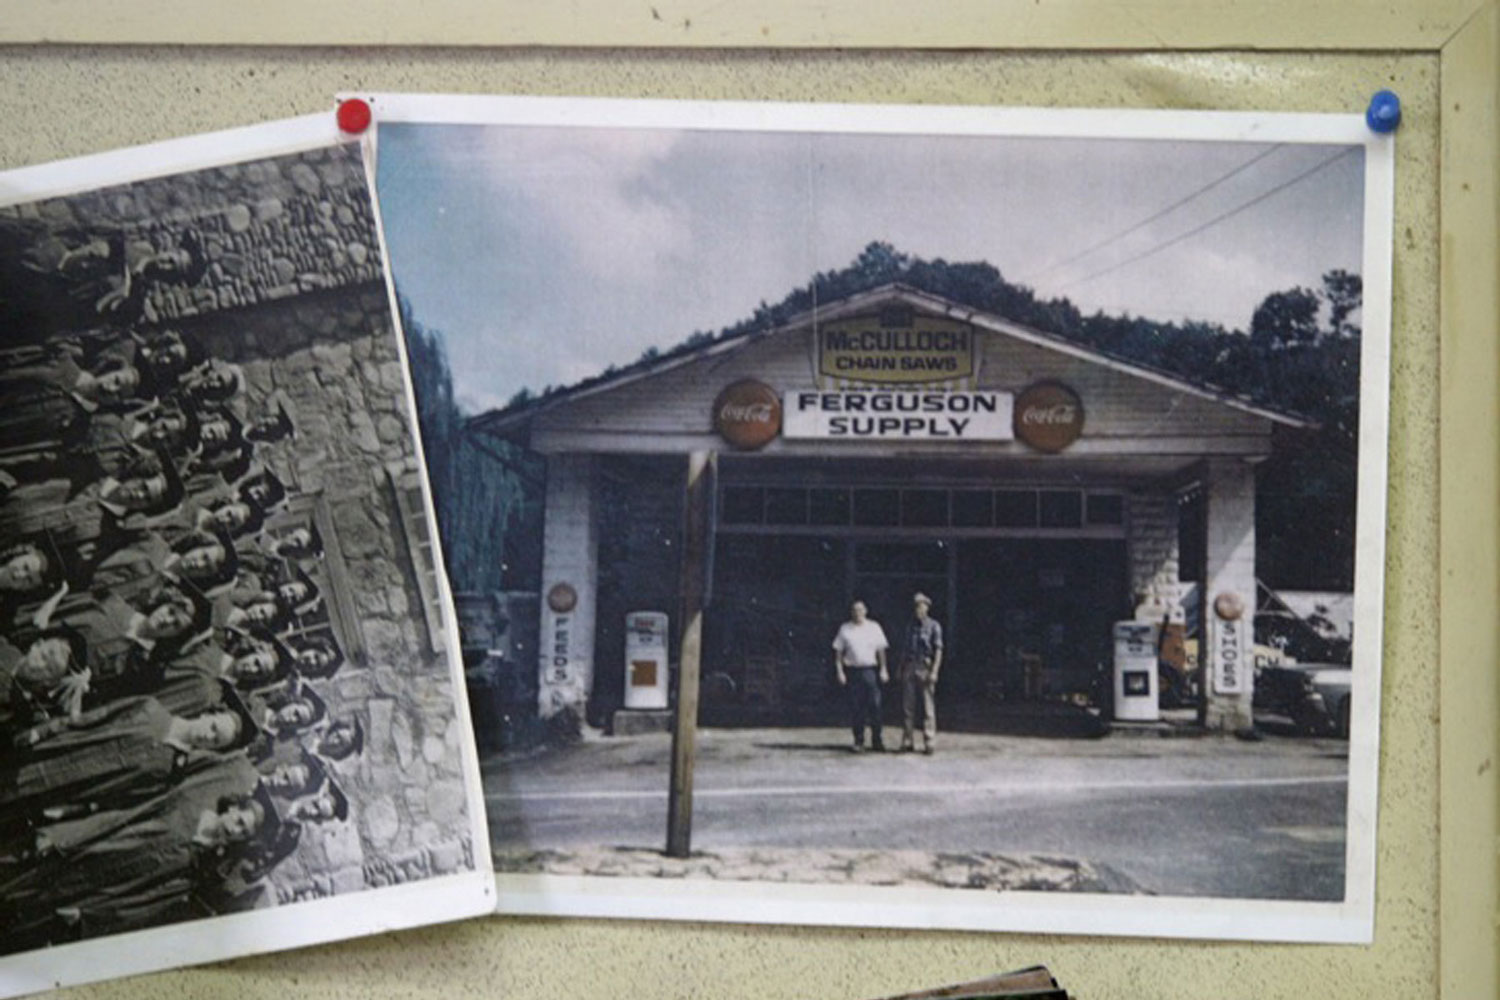 Photographs of an old convenience store thumb tacked to a corkboard